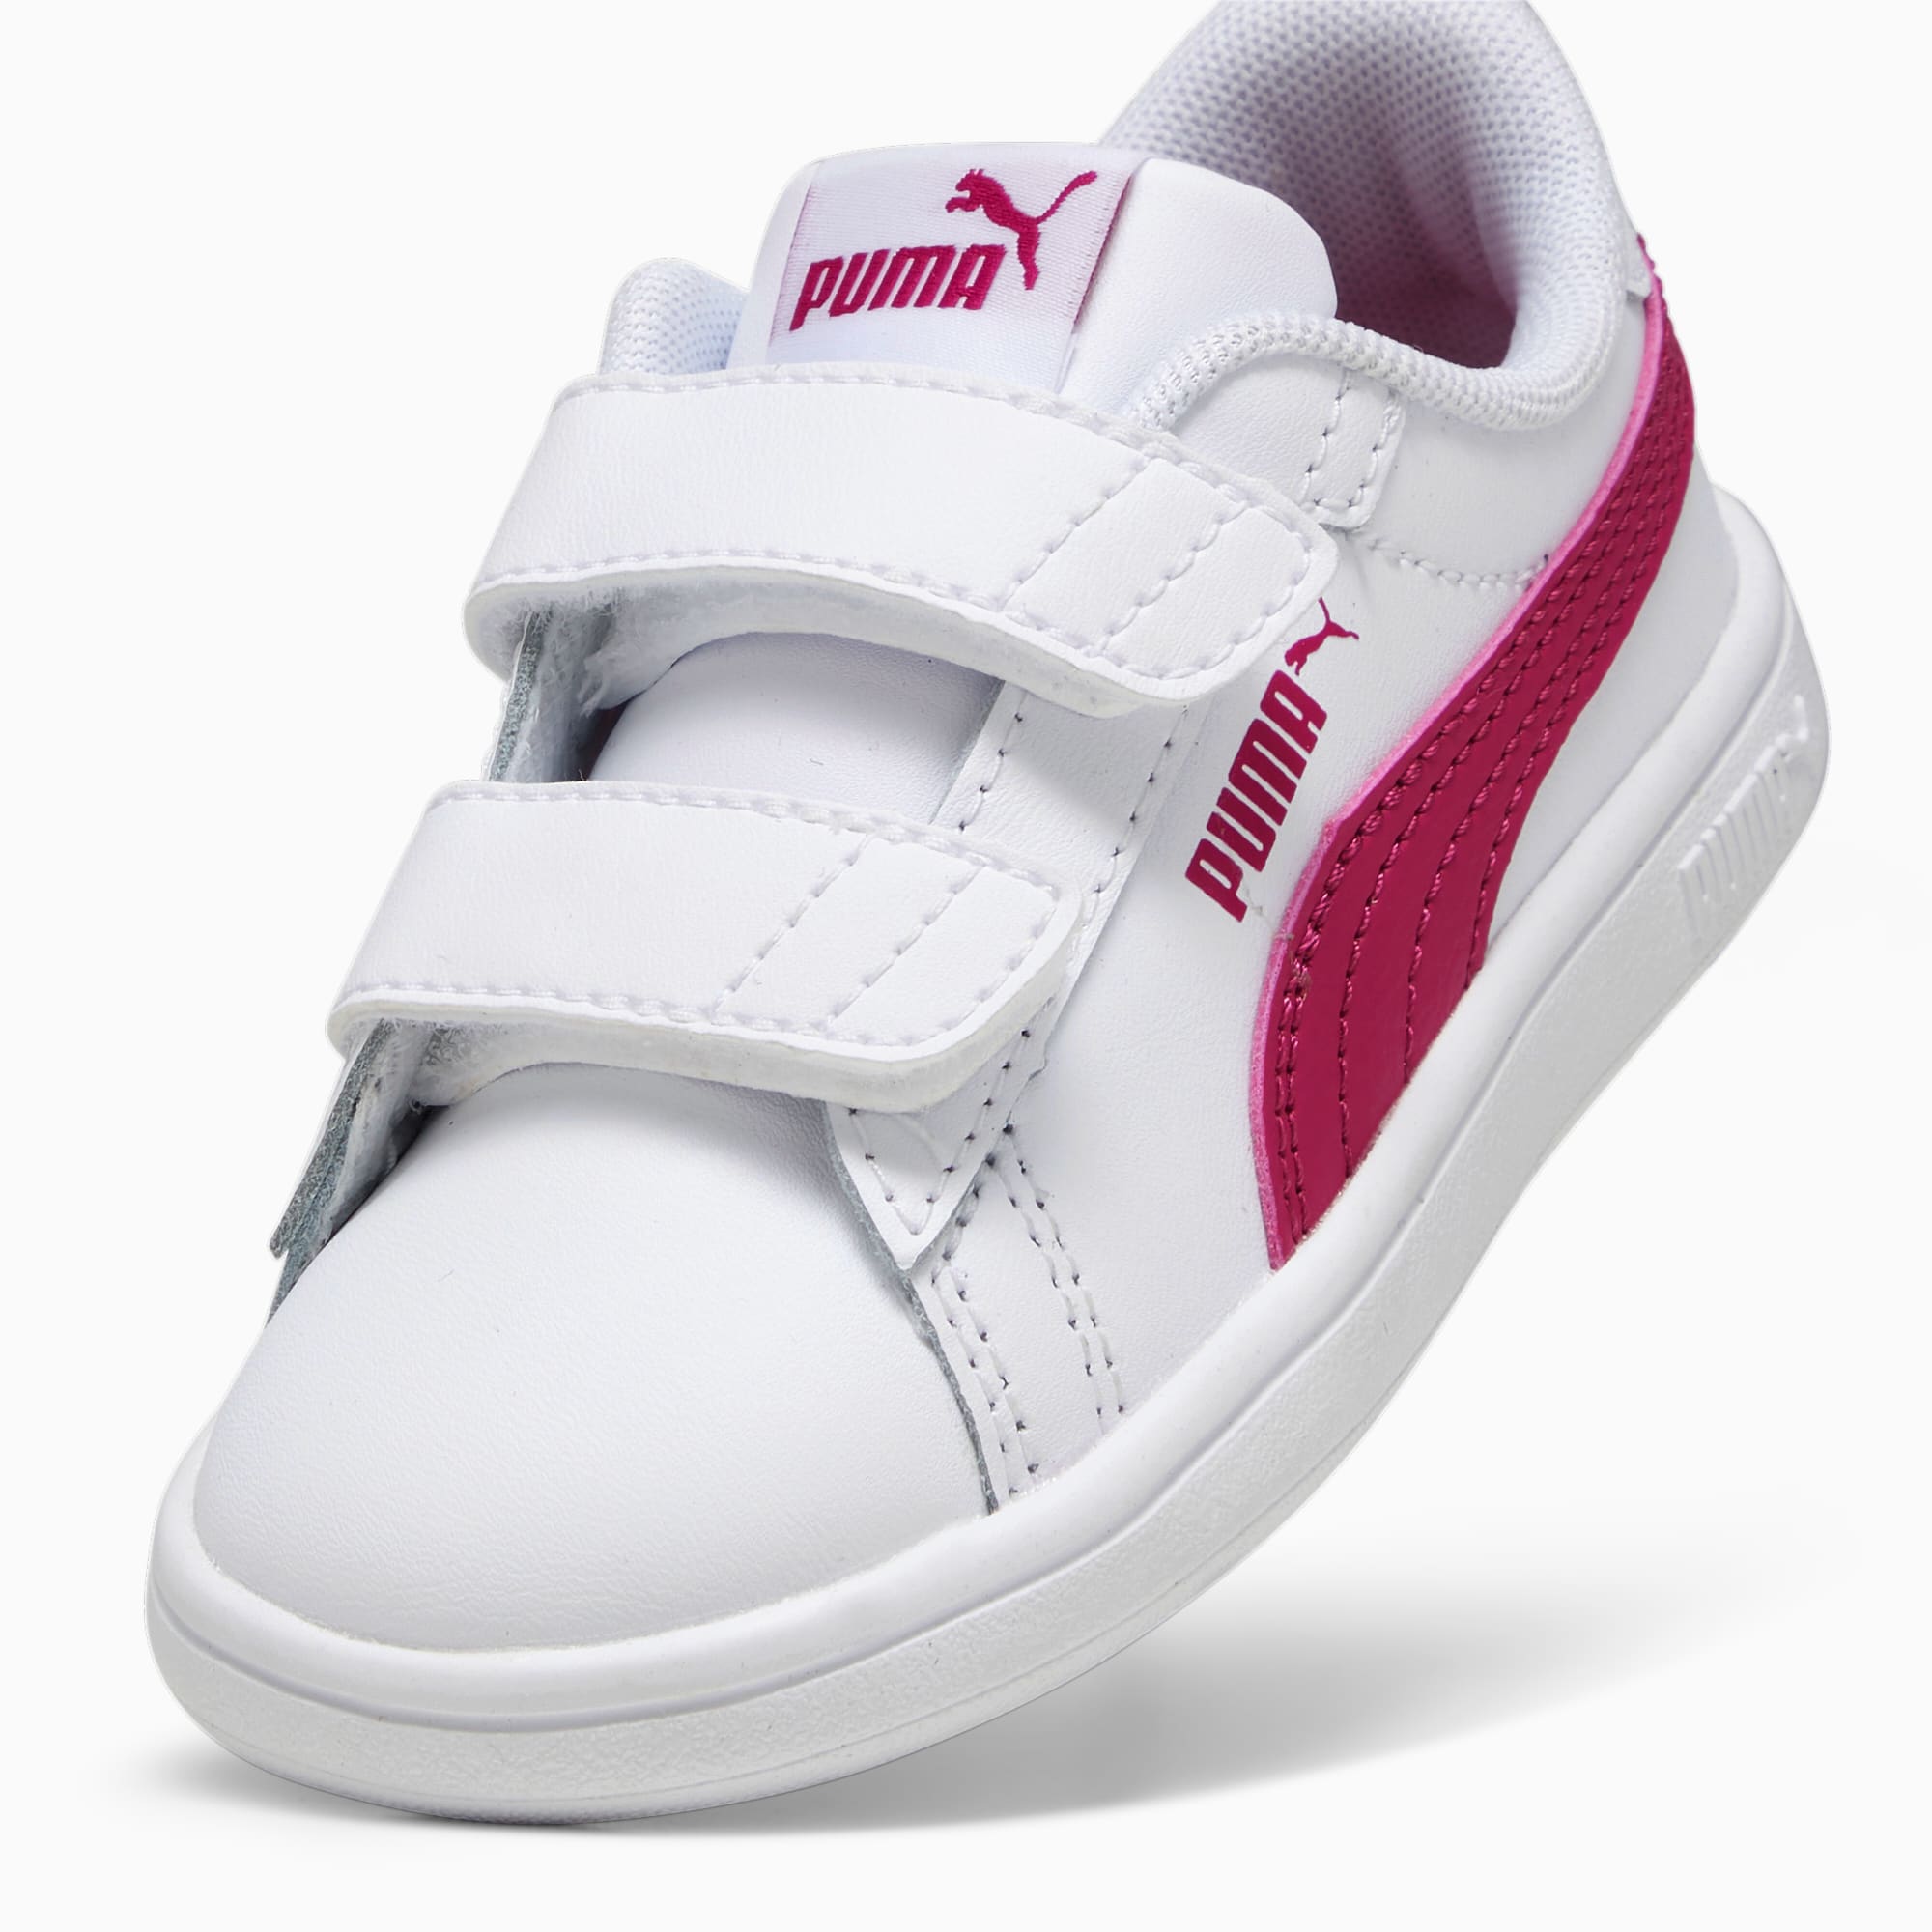 PUMA Smash 3.0 Leather V Sneakers Baby, White/Pinktastic, Size 19, Shoes